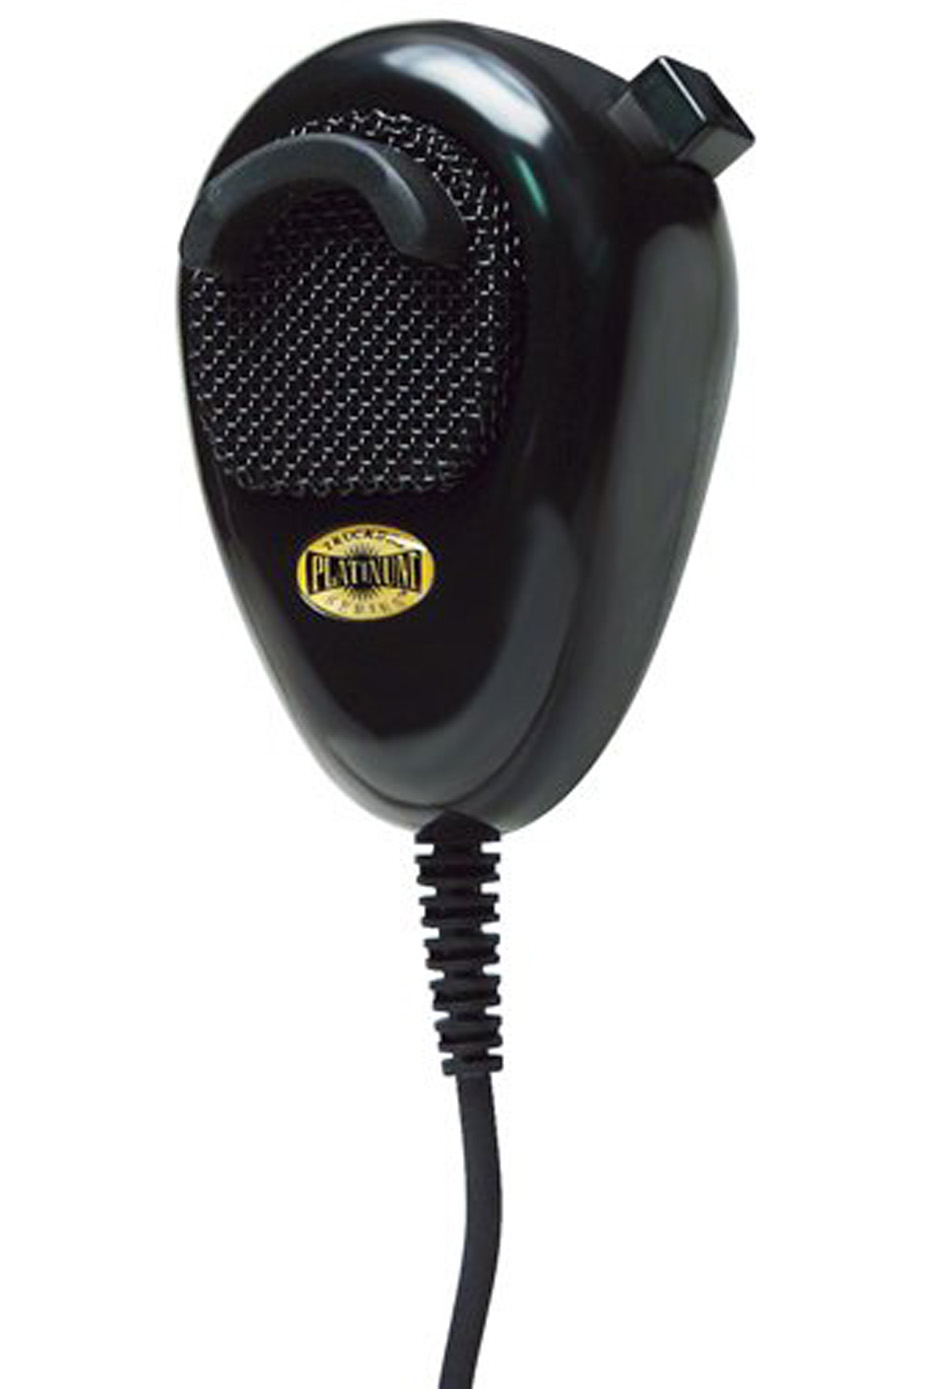 Ps-3004 Platinum Series Professional 4 Pin Black Noise Cancelling Dynamic Microphone With Top Push Button & 9' Coiled Cord